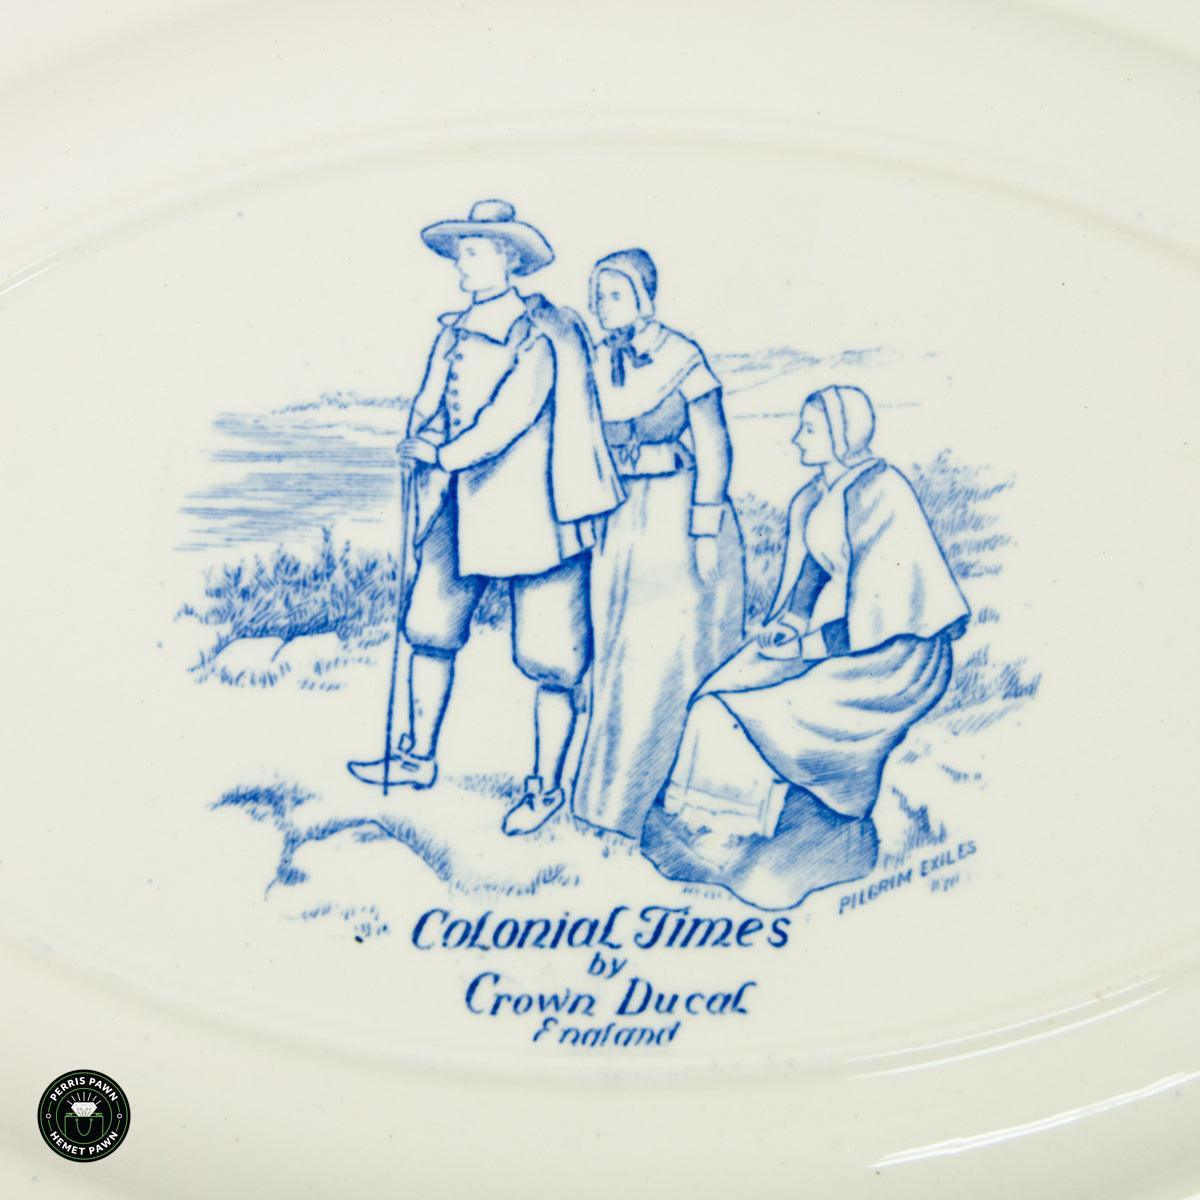 Crown Ducal Oval Serving Platter "colonial Times" 1st Seremon - Made in England - ipawnishop.com